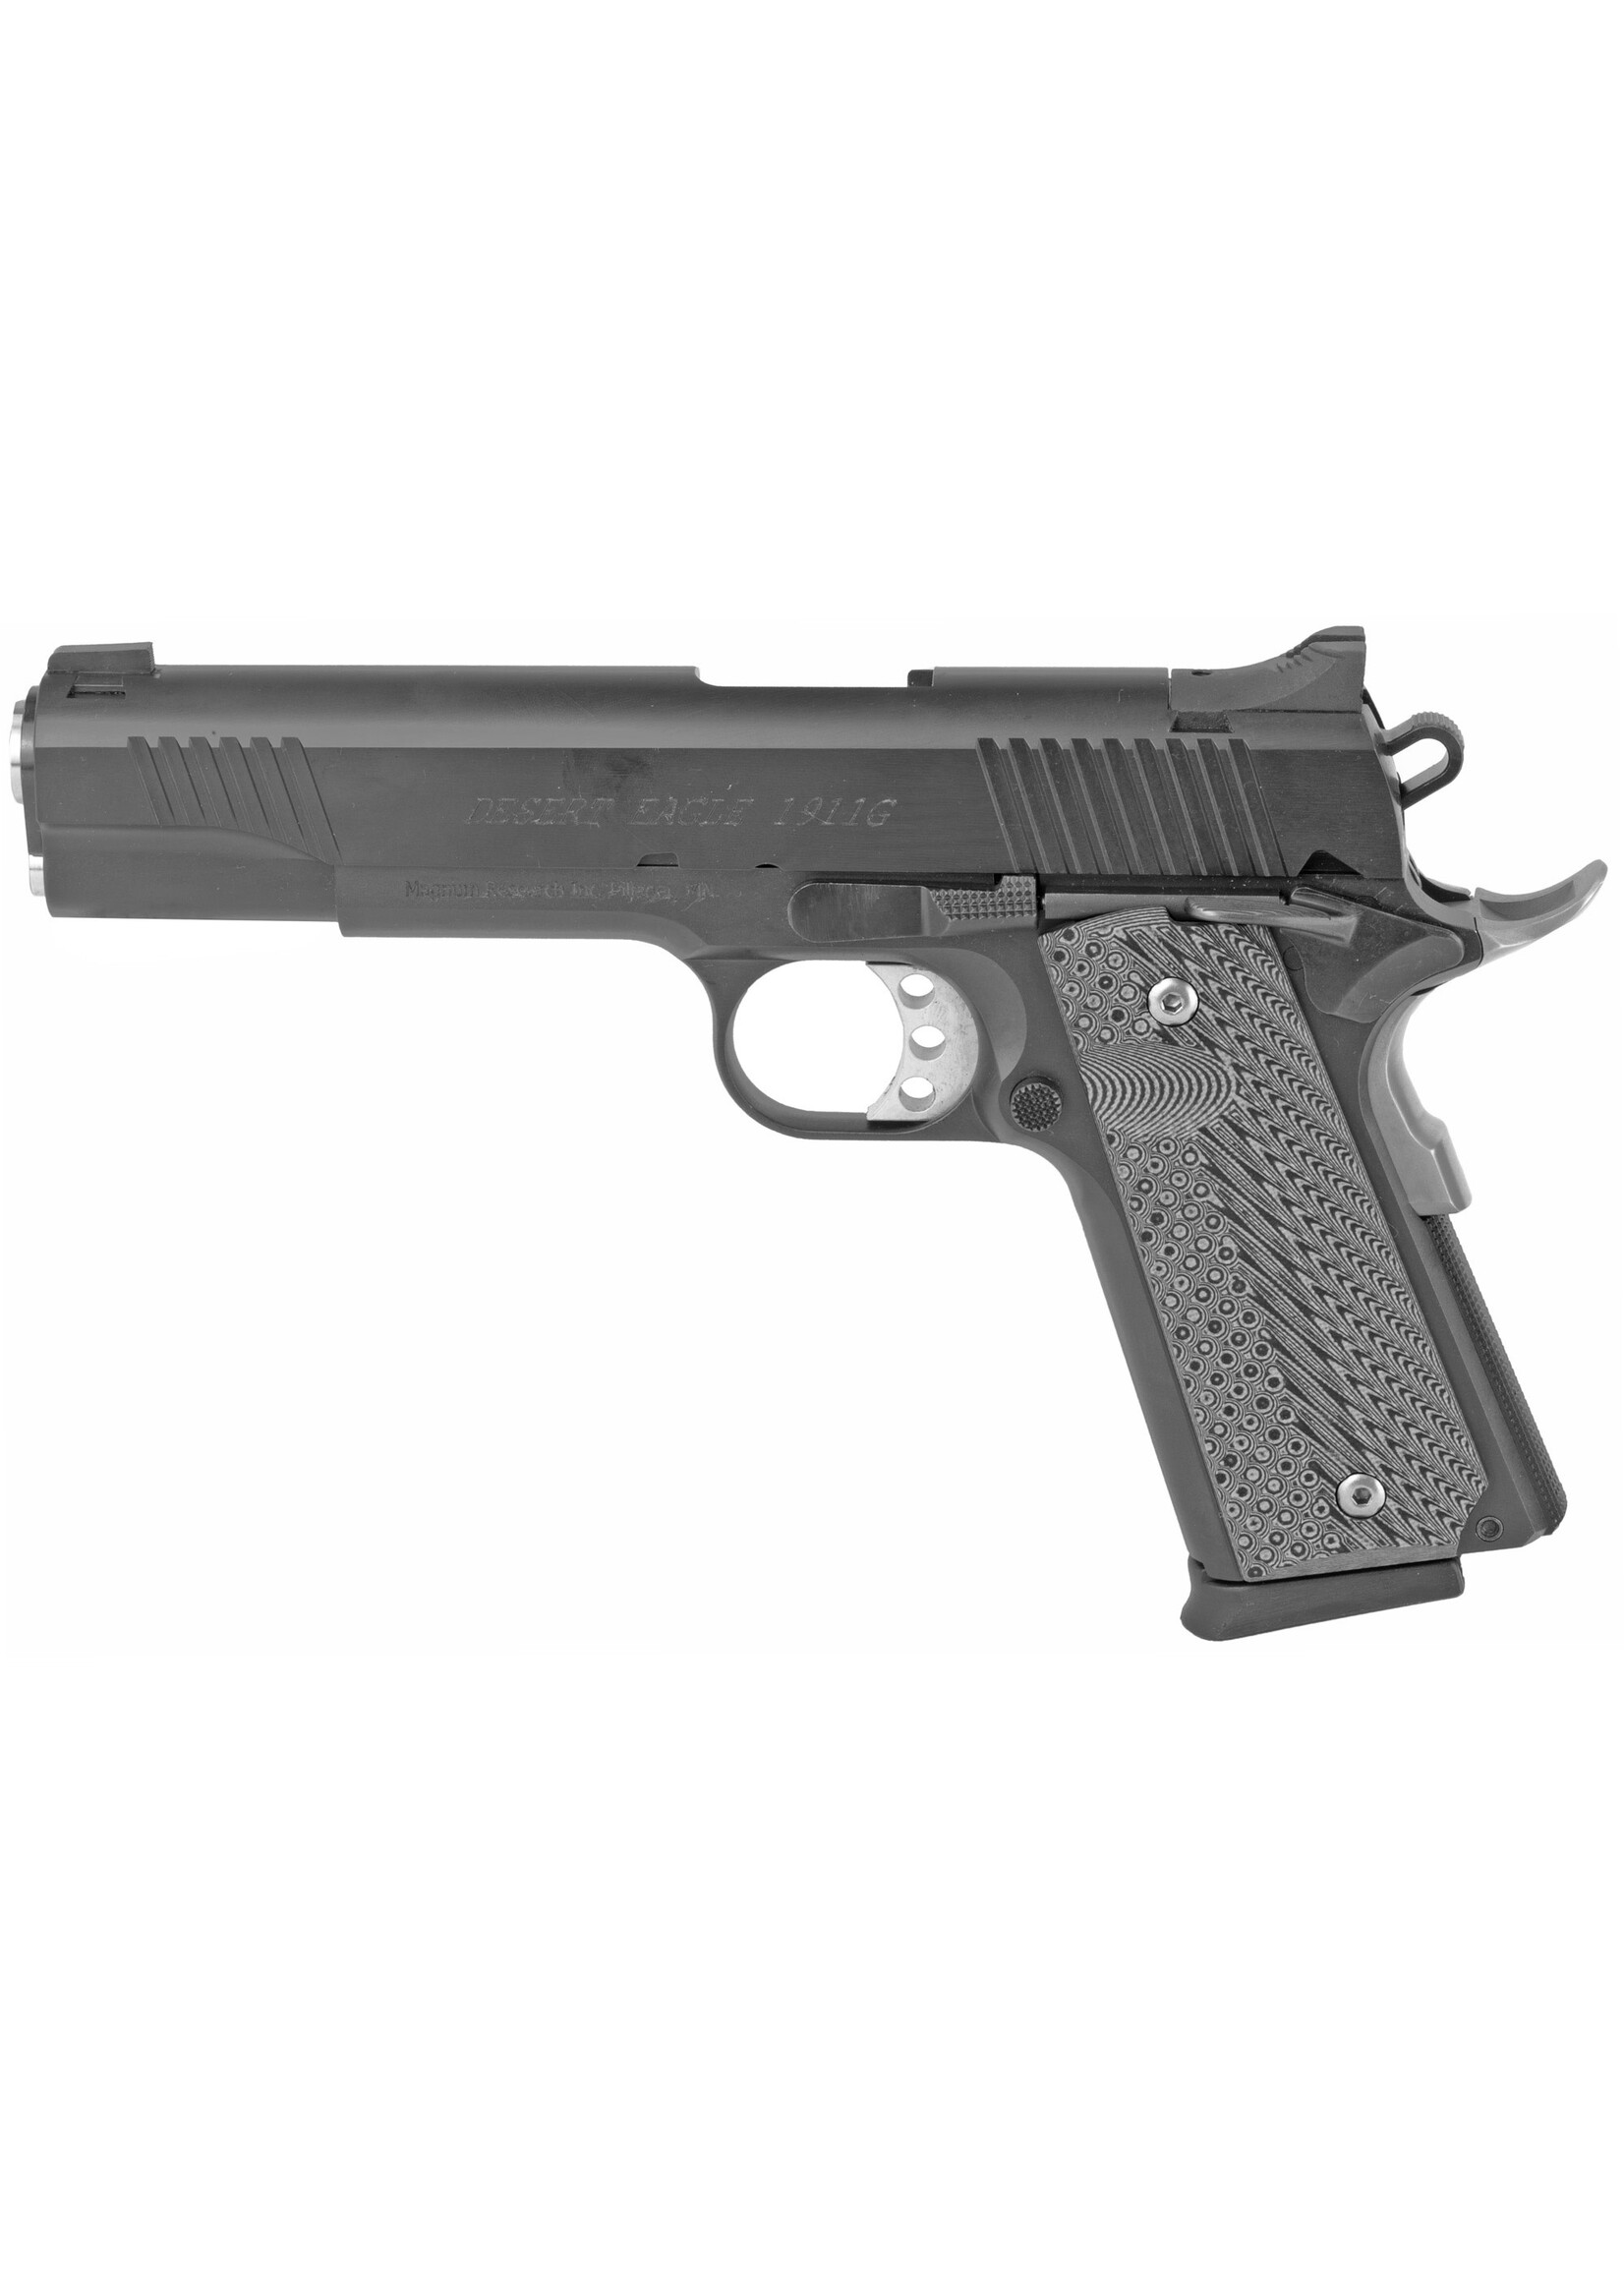 Magnum Research Magnum Research, 1911G, 1911, Semi-automatic, Metal Frame Pistol, Full Size, 45 ACP, 5" Barrel, Steel, Black, G10 Grips, Fixed Sights, 8 Rounds, 2 Magazines